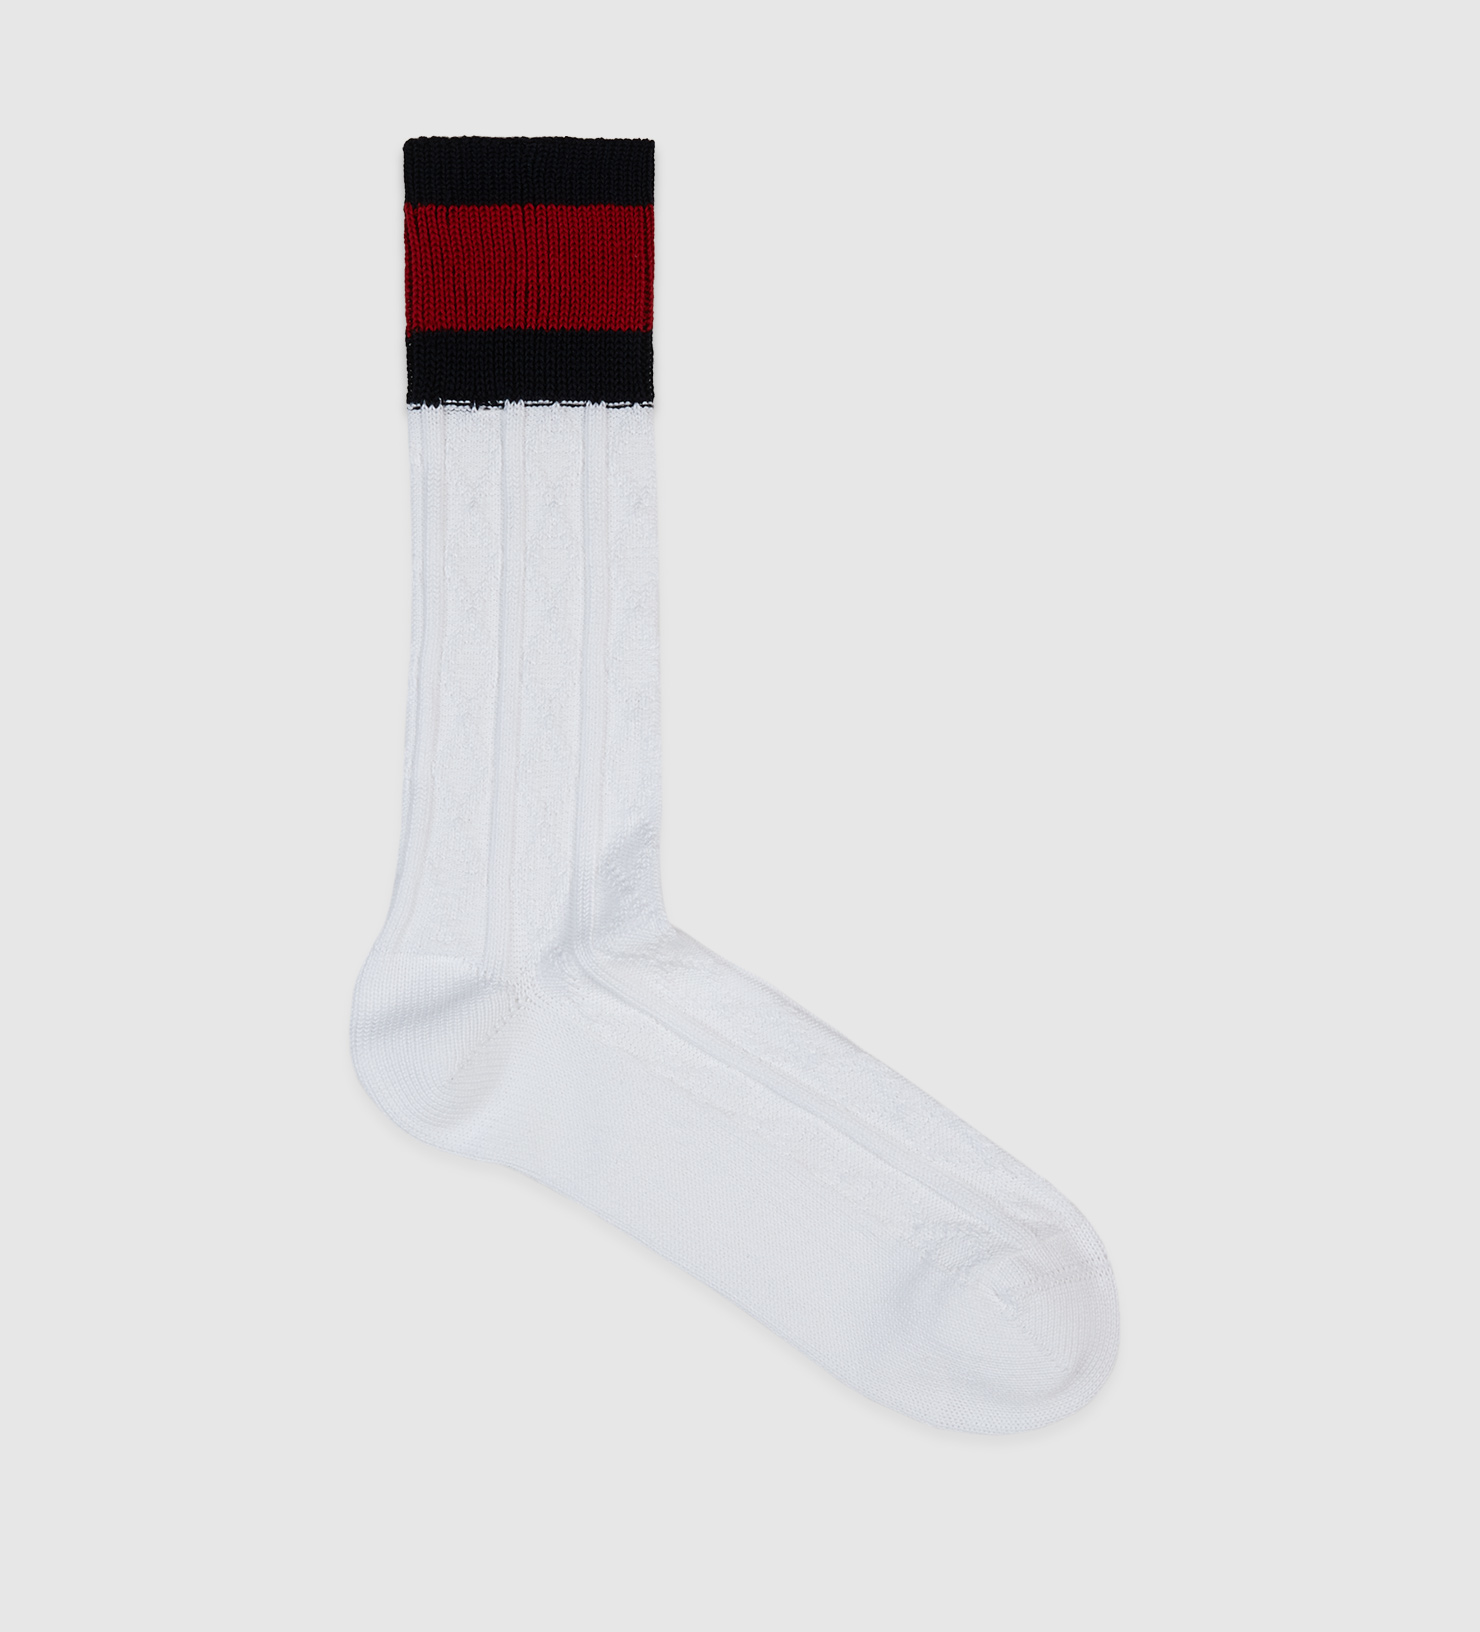 Lyst - Gucci Stretch Cotton Socks With Web in White for Men